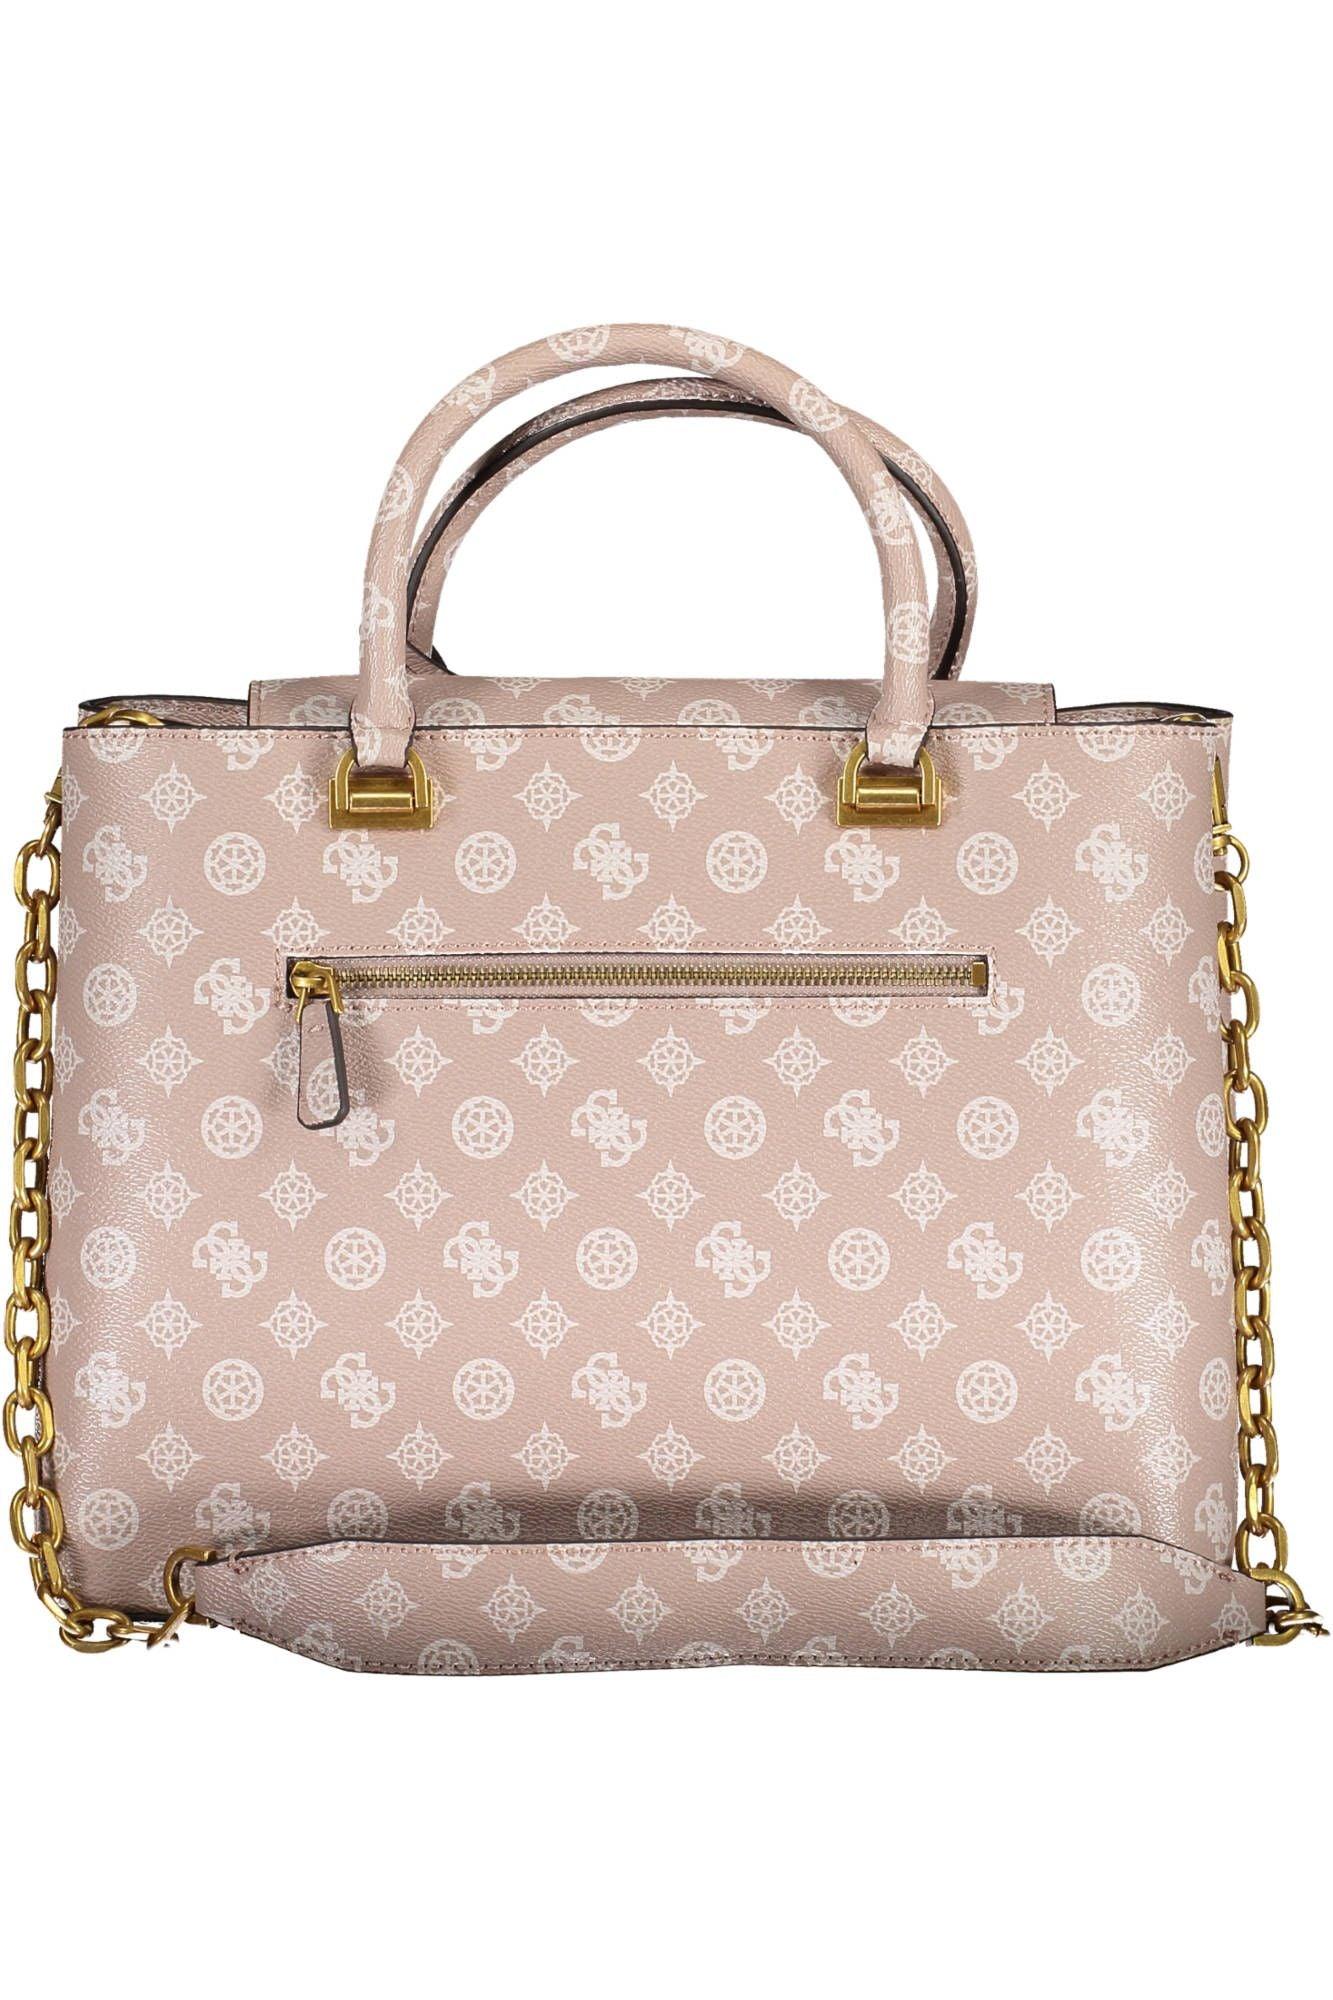 Guess Jeans Chic Pink Two-Handle Guess Handbag with Chain Strap - PER.FASHION